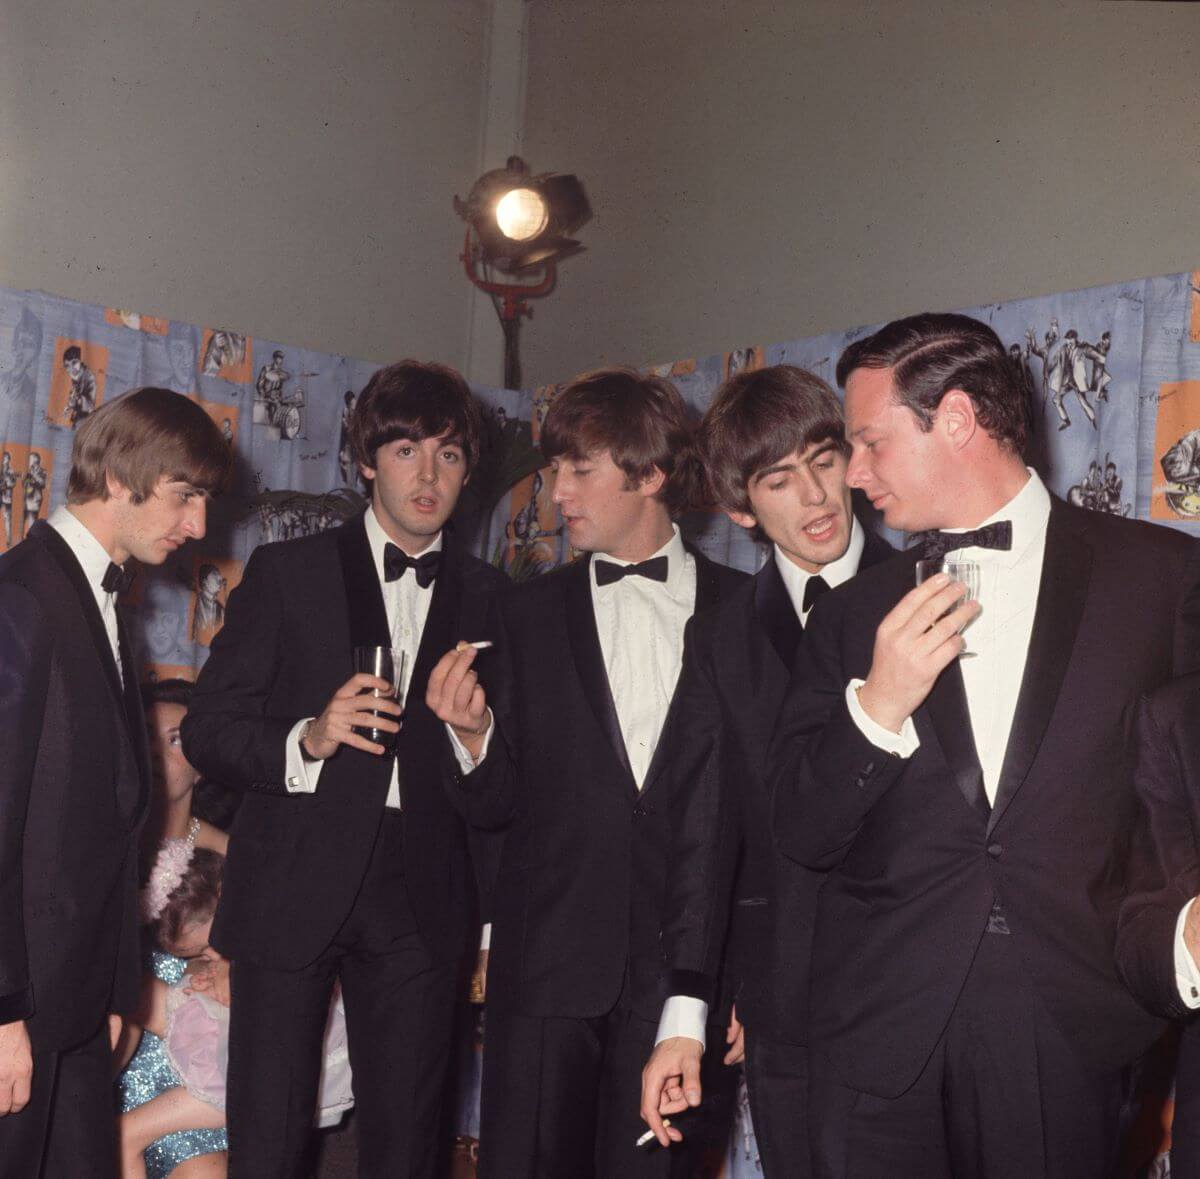 The Beatles wear tuxedos and stand in a line behind Brian Epstein. Epstein turns to listen to George Harrison, who holds a cigarette. John Lennon holds a cigarette and Paul McCartney holds a glass.